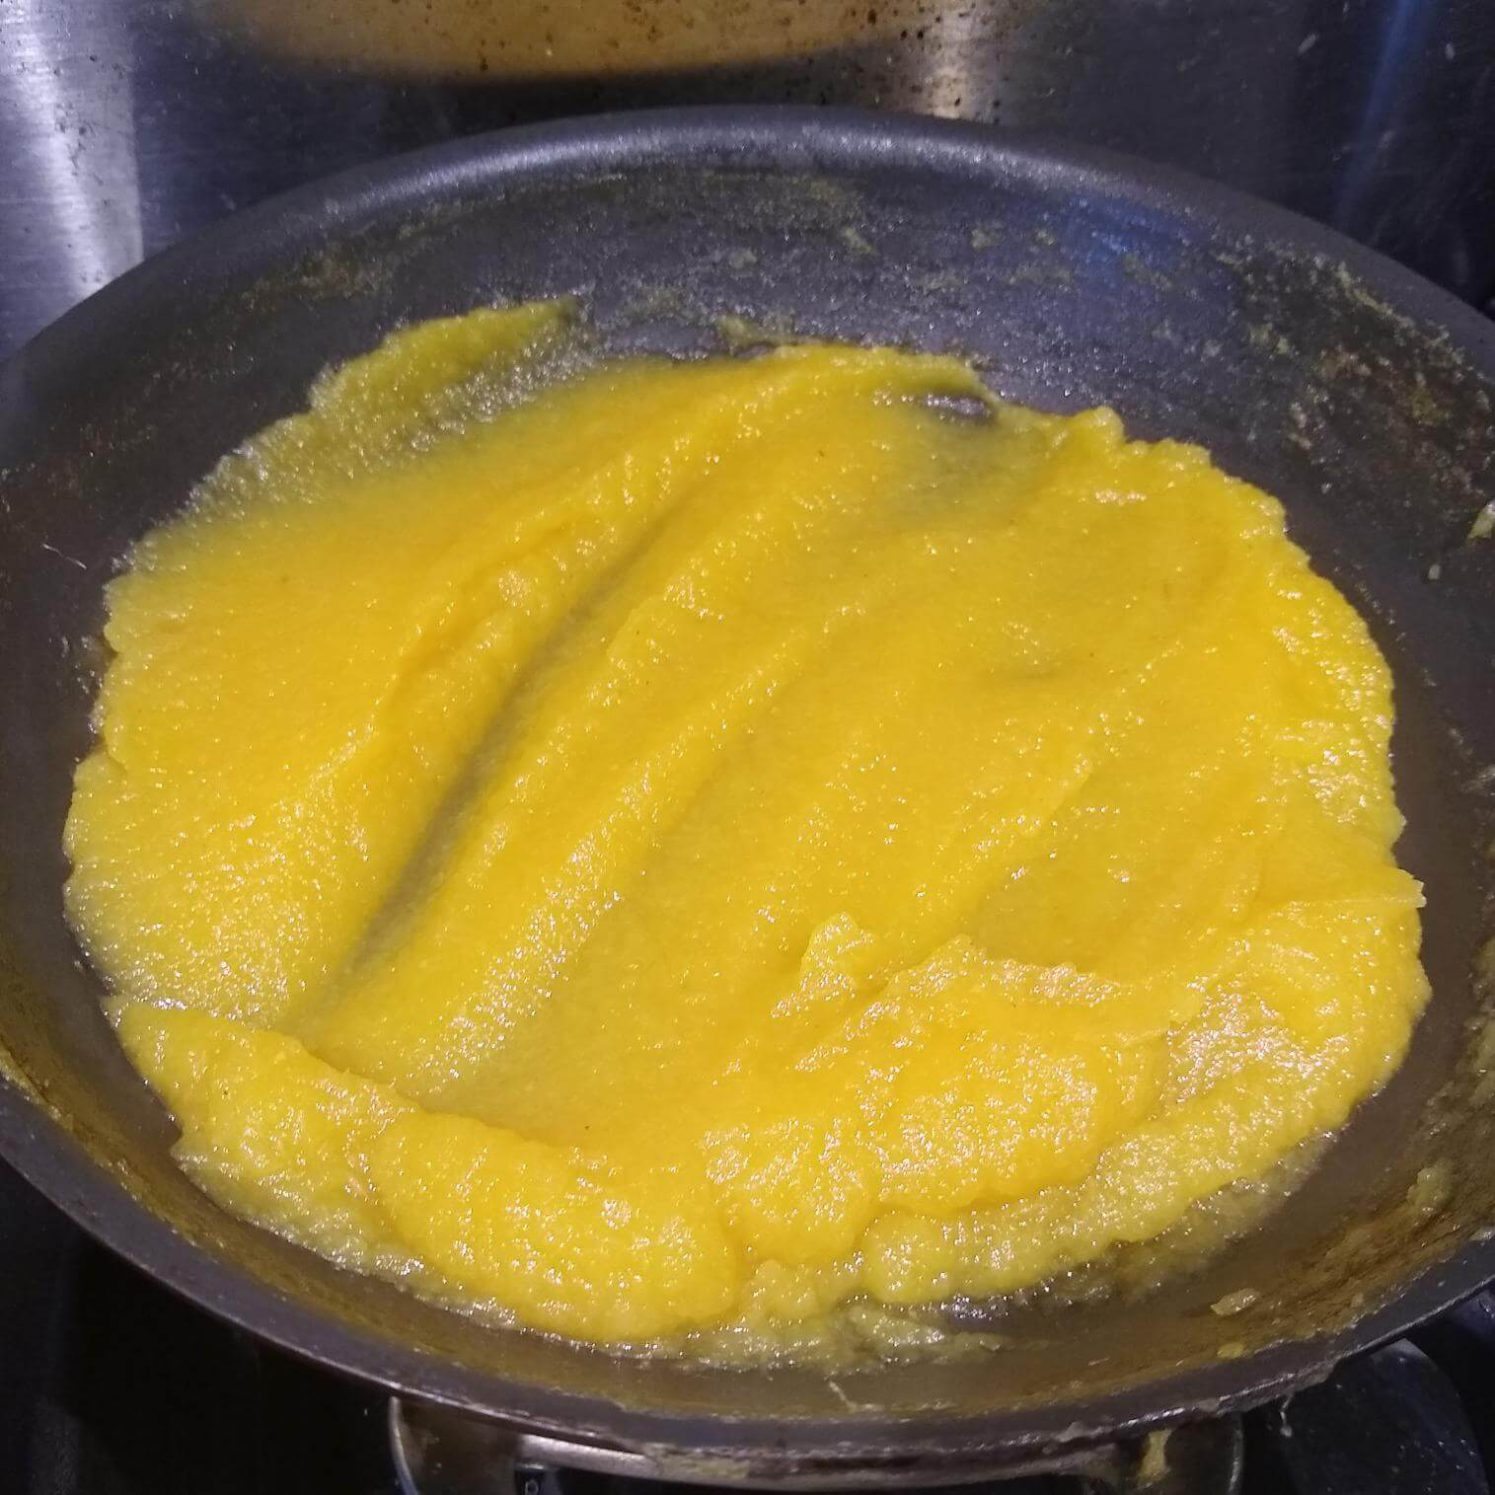 Excess water cooked out of pineapple cake filling